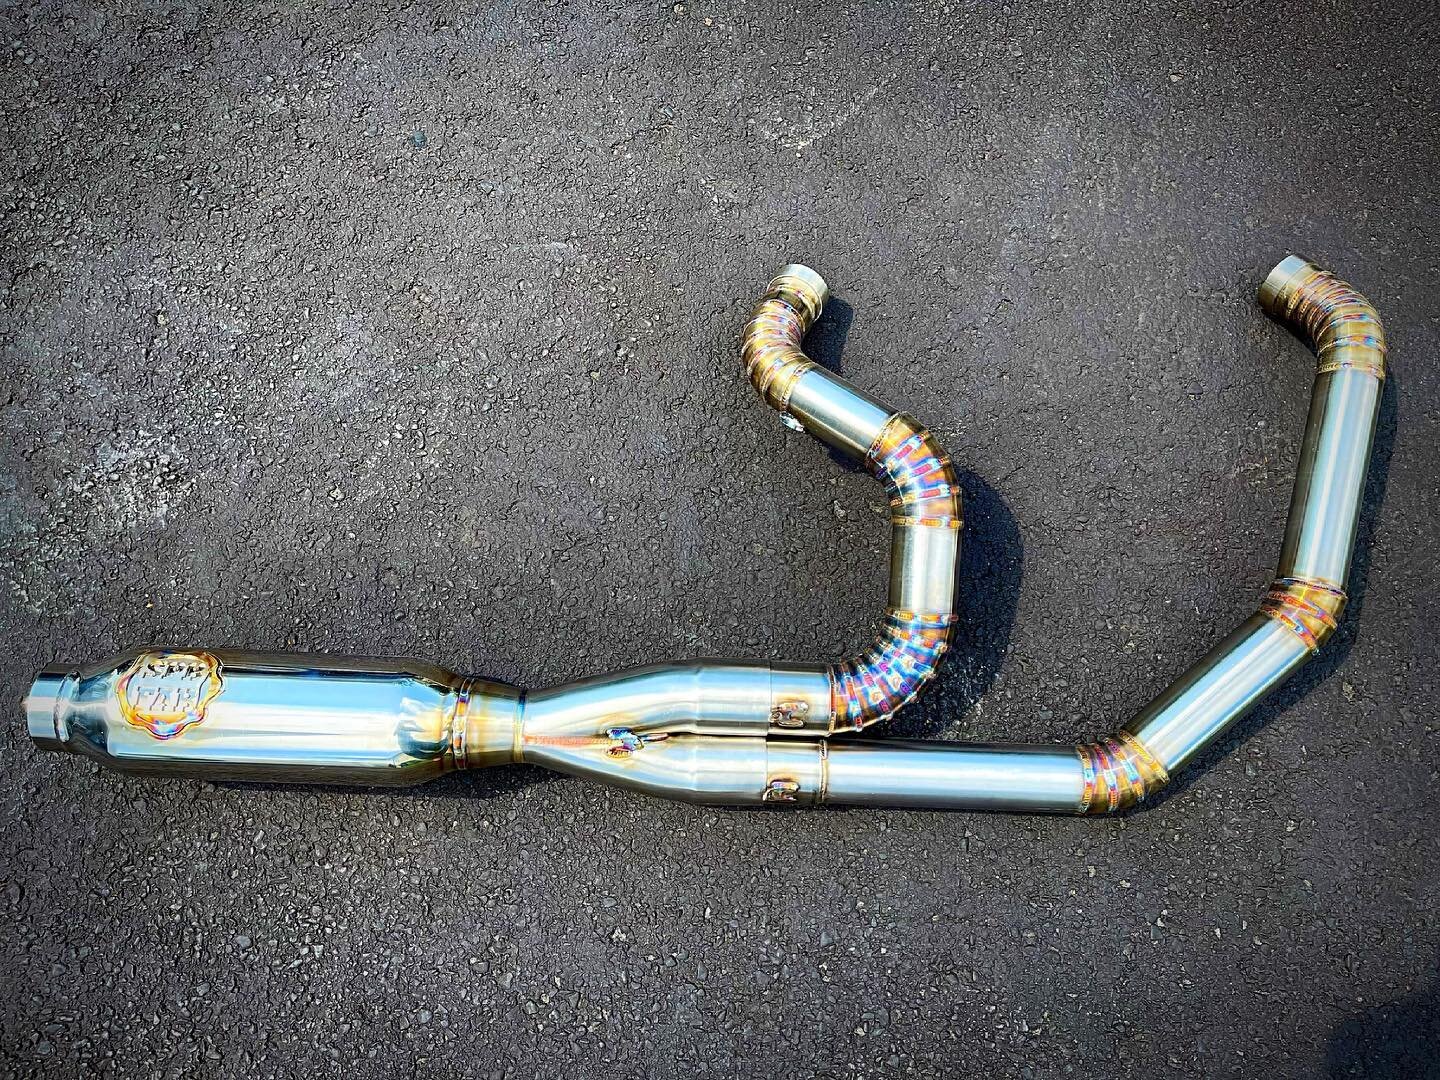 🔥 World first Dyna pie cut exhaust 🔥 
Thanks @bradeagles for the support 🙏
.

#turboharley #harleydavidson #harleydavidsonmotorcycle #harleydavidsonmotorcycles #harleydavidsonaddicts #performanceharley #performancebagger #performancebaggers #124m8